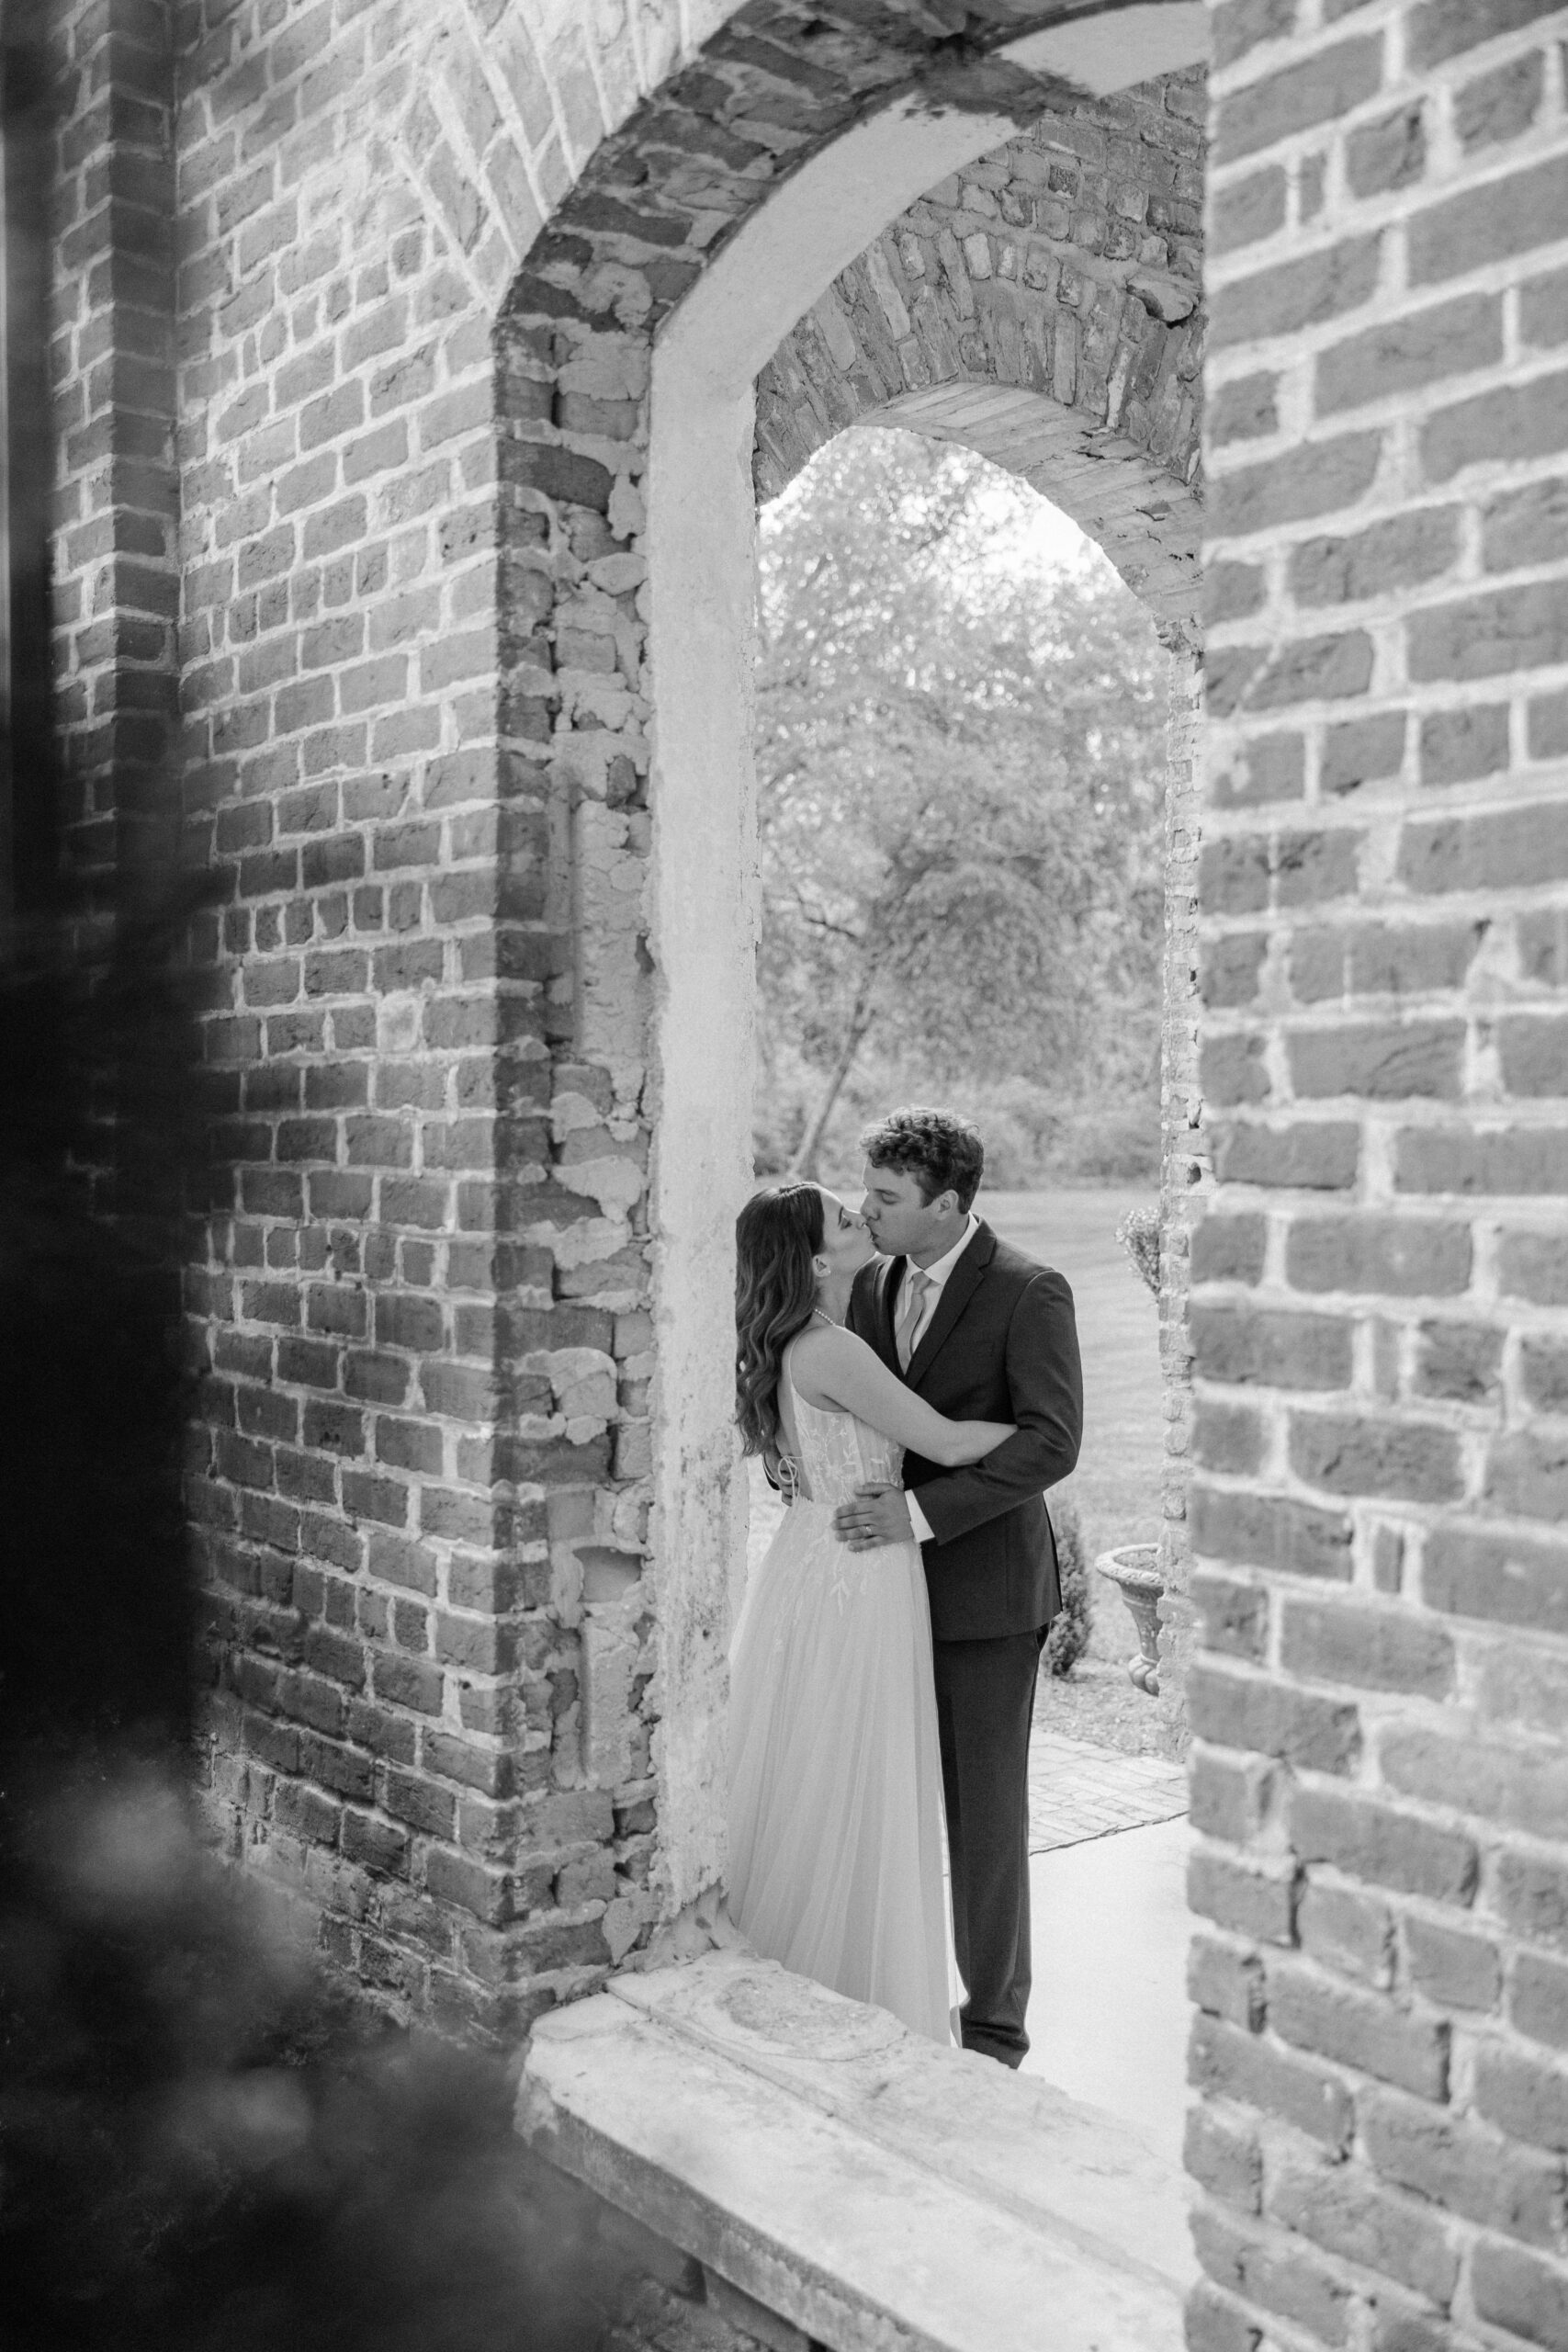 Newlyweds share an intimate kiss through a window on the patio of their brick wedding venue